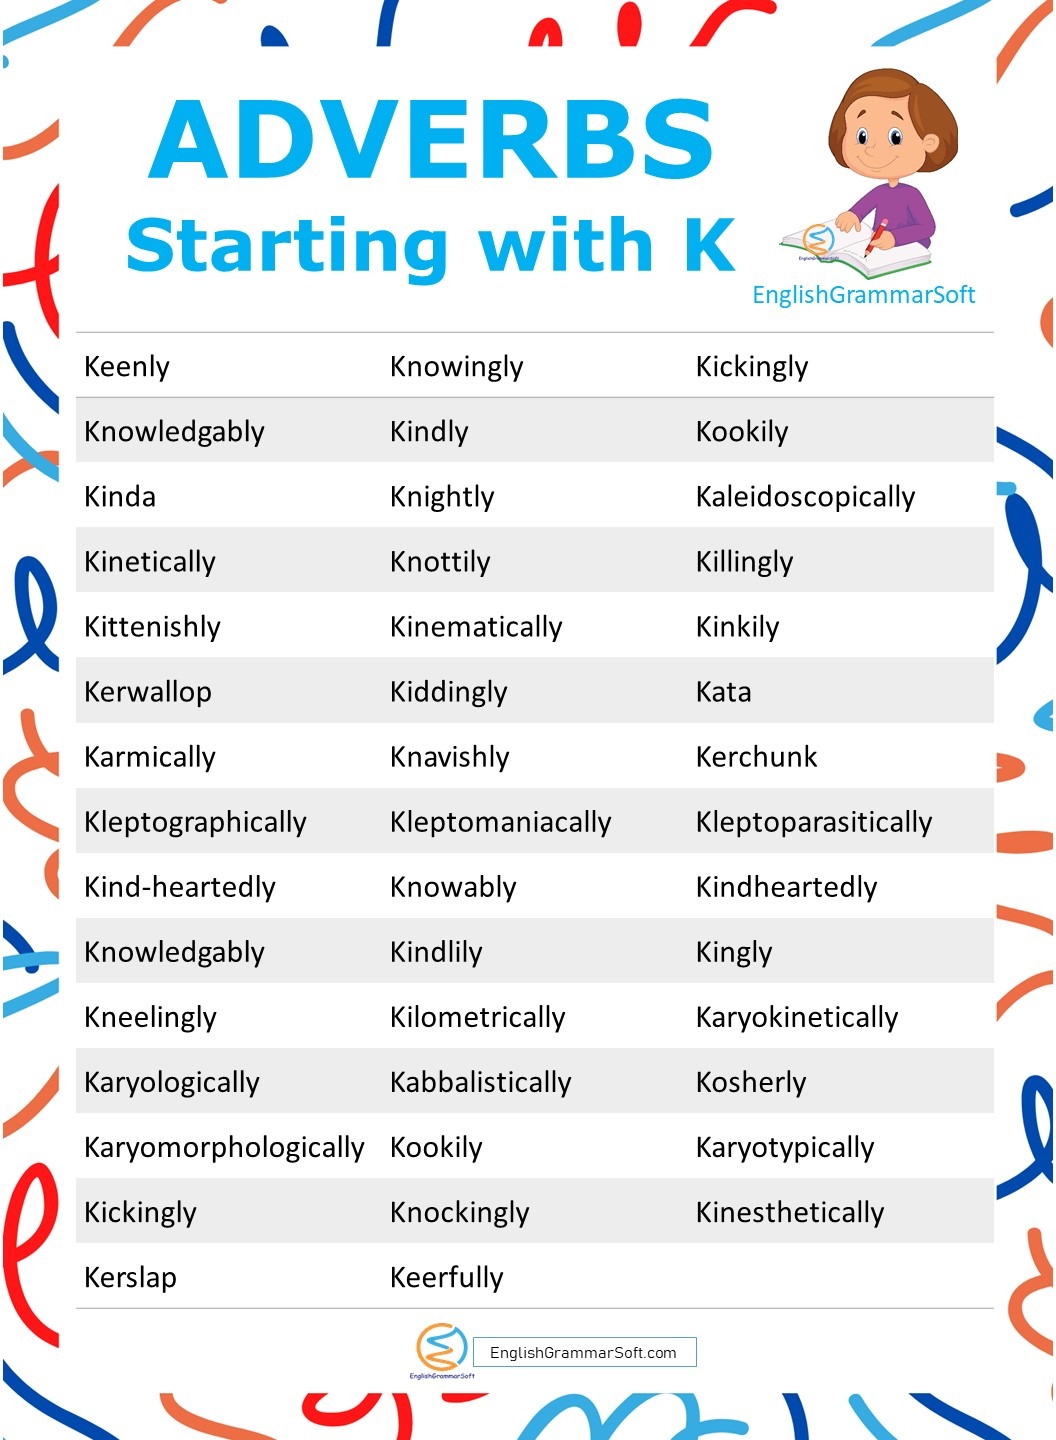 adverbs starting with K